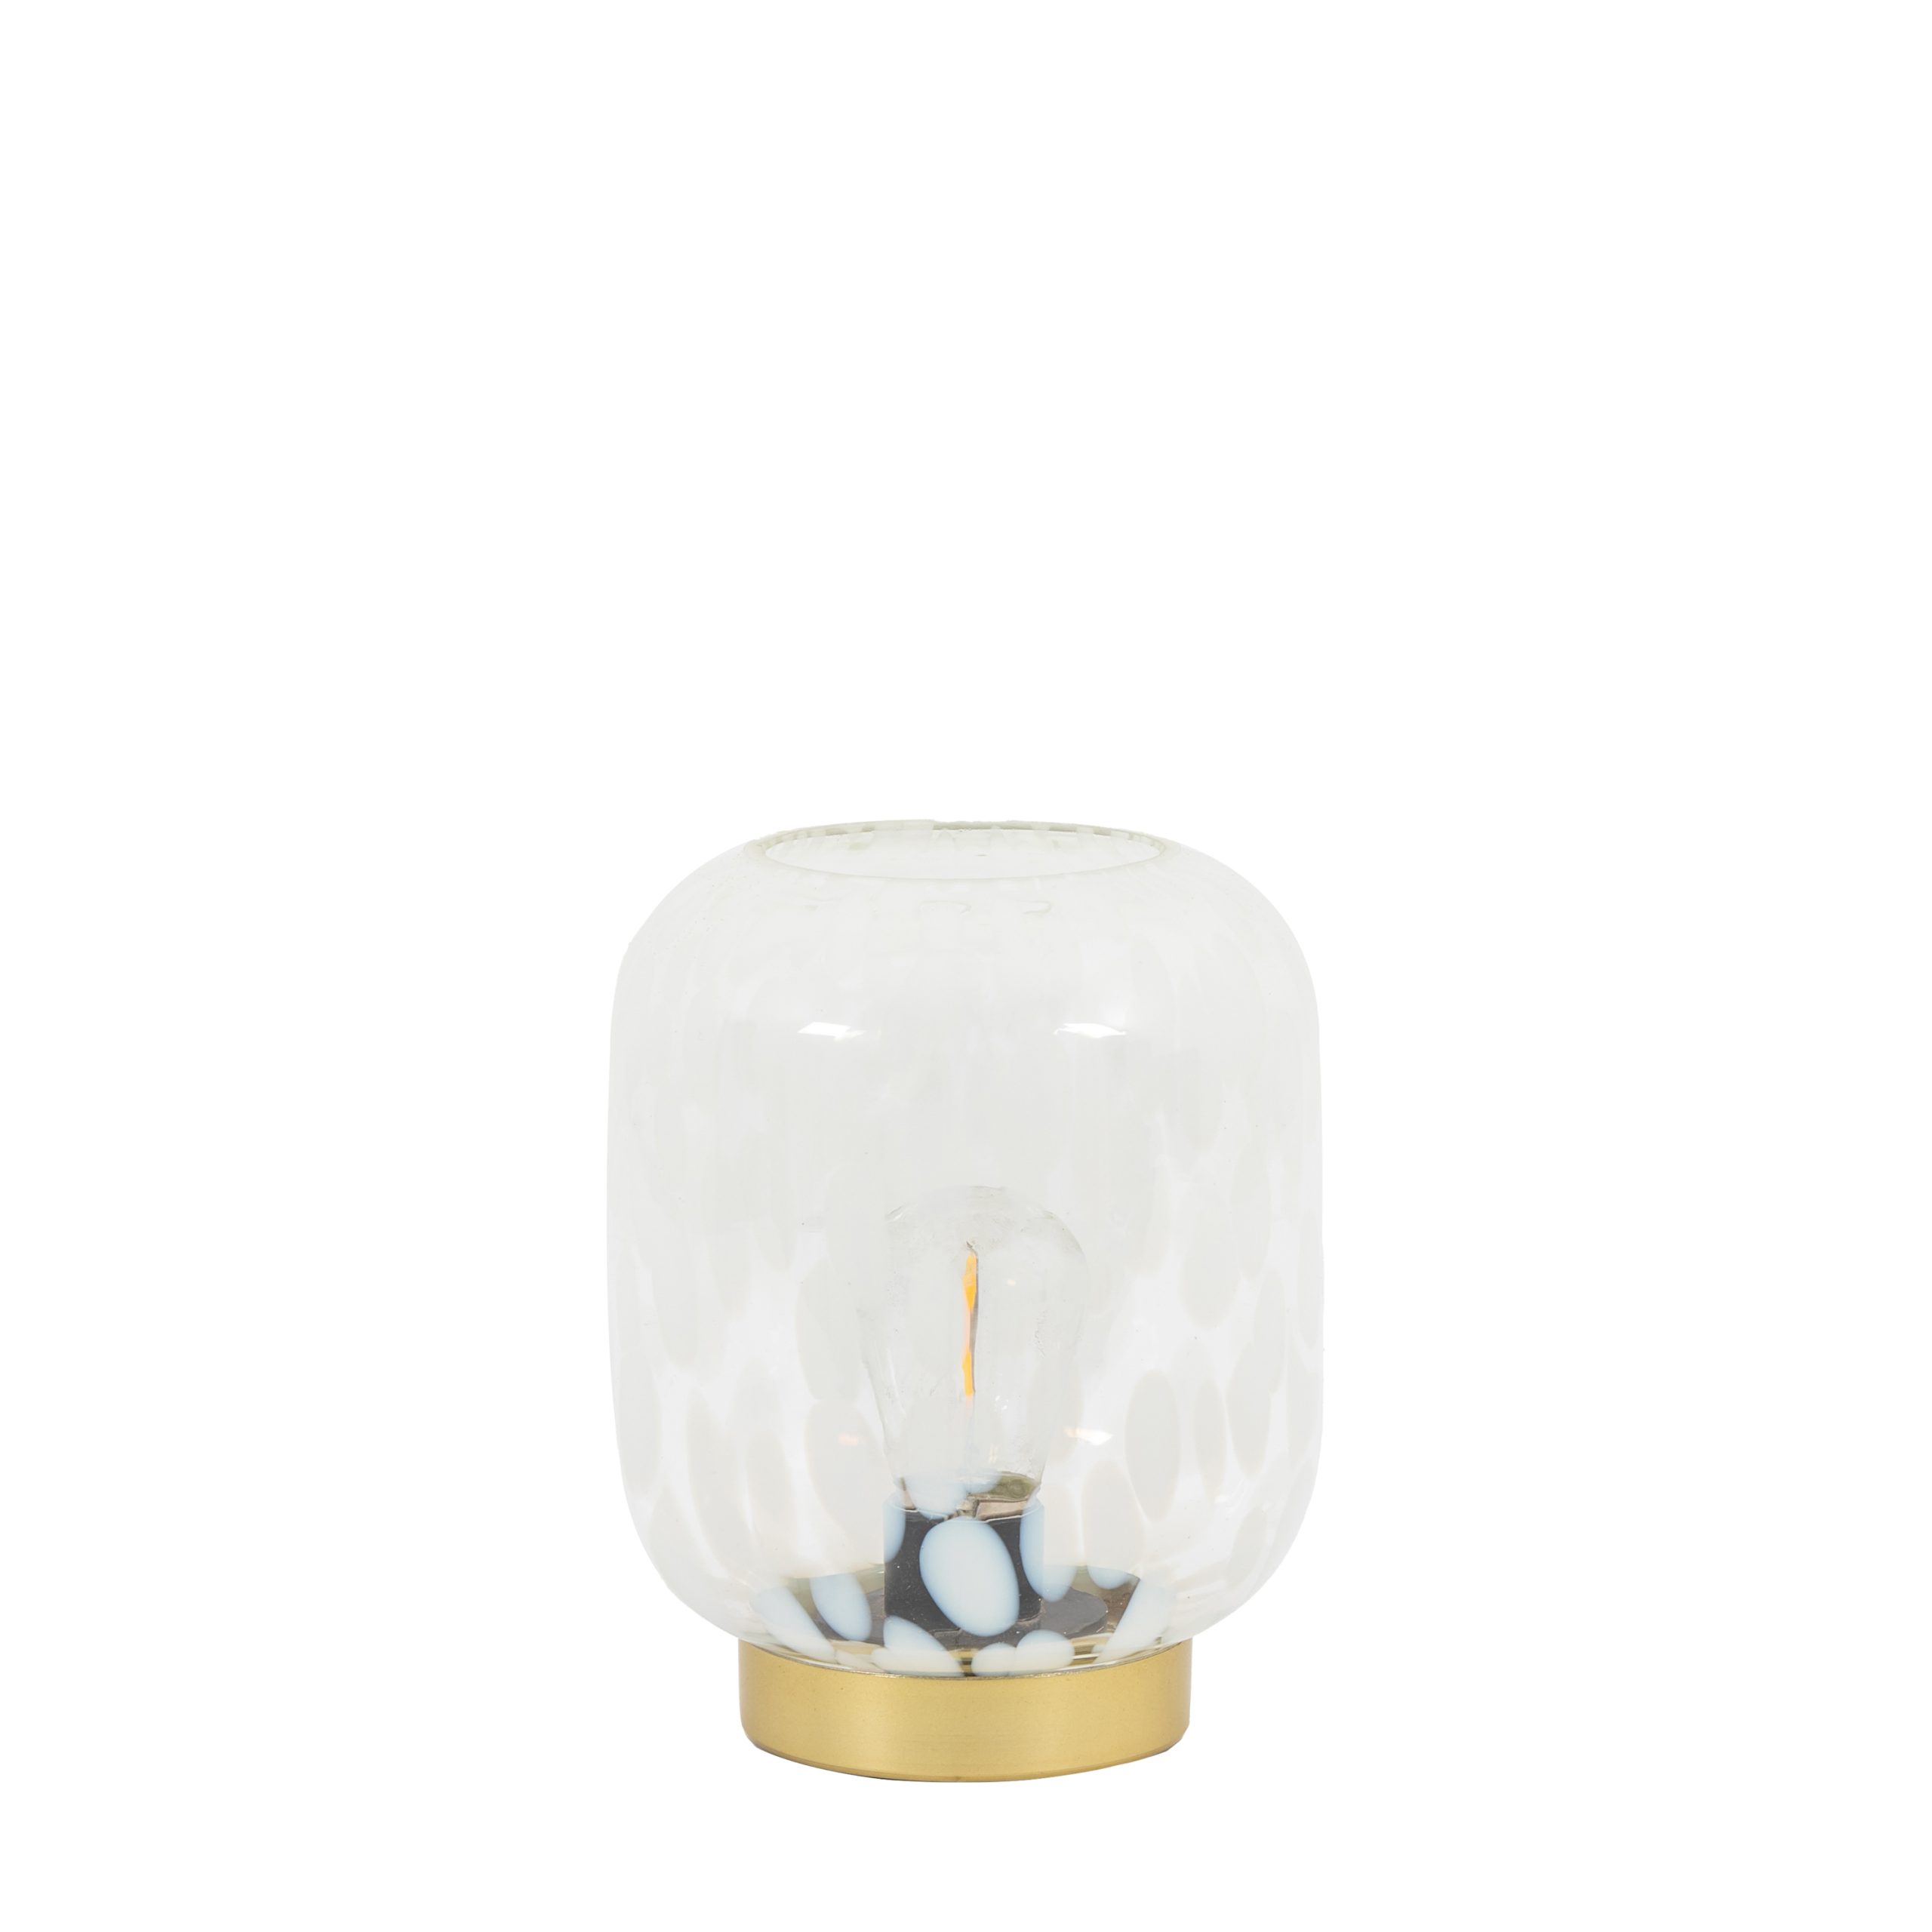 Gallery Direct Maeve LED Lamp White Gold